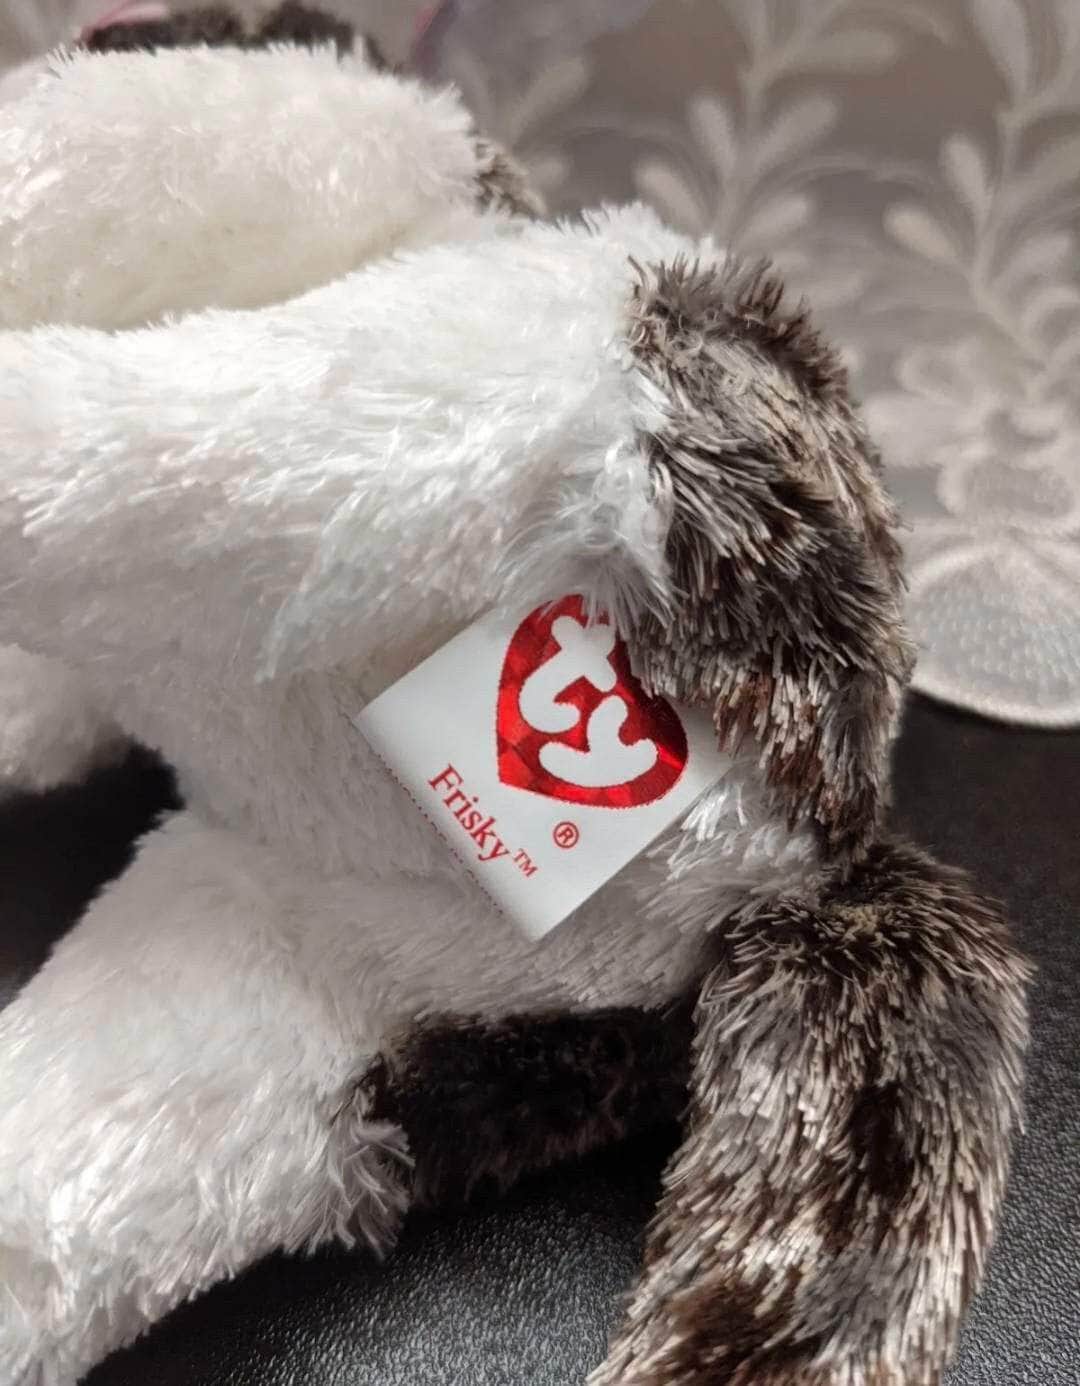 Ty Beanie Baby Of The Month for September - Frisky The Gray And White Cat (6in) - Vintage Beanies Canada